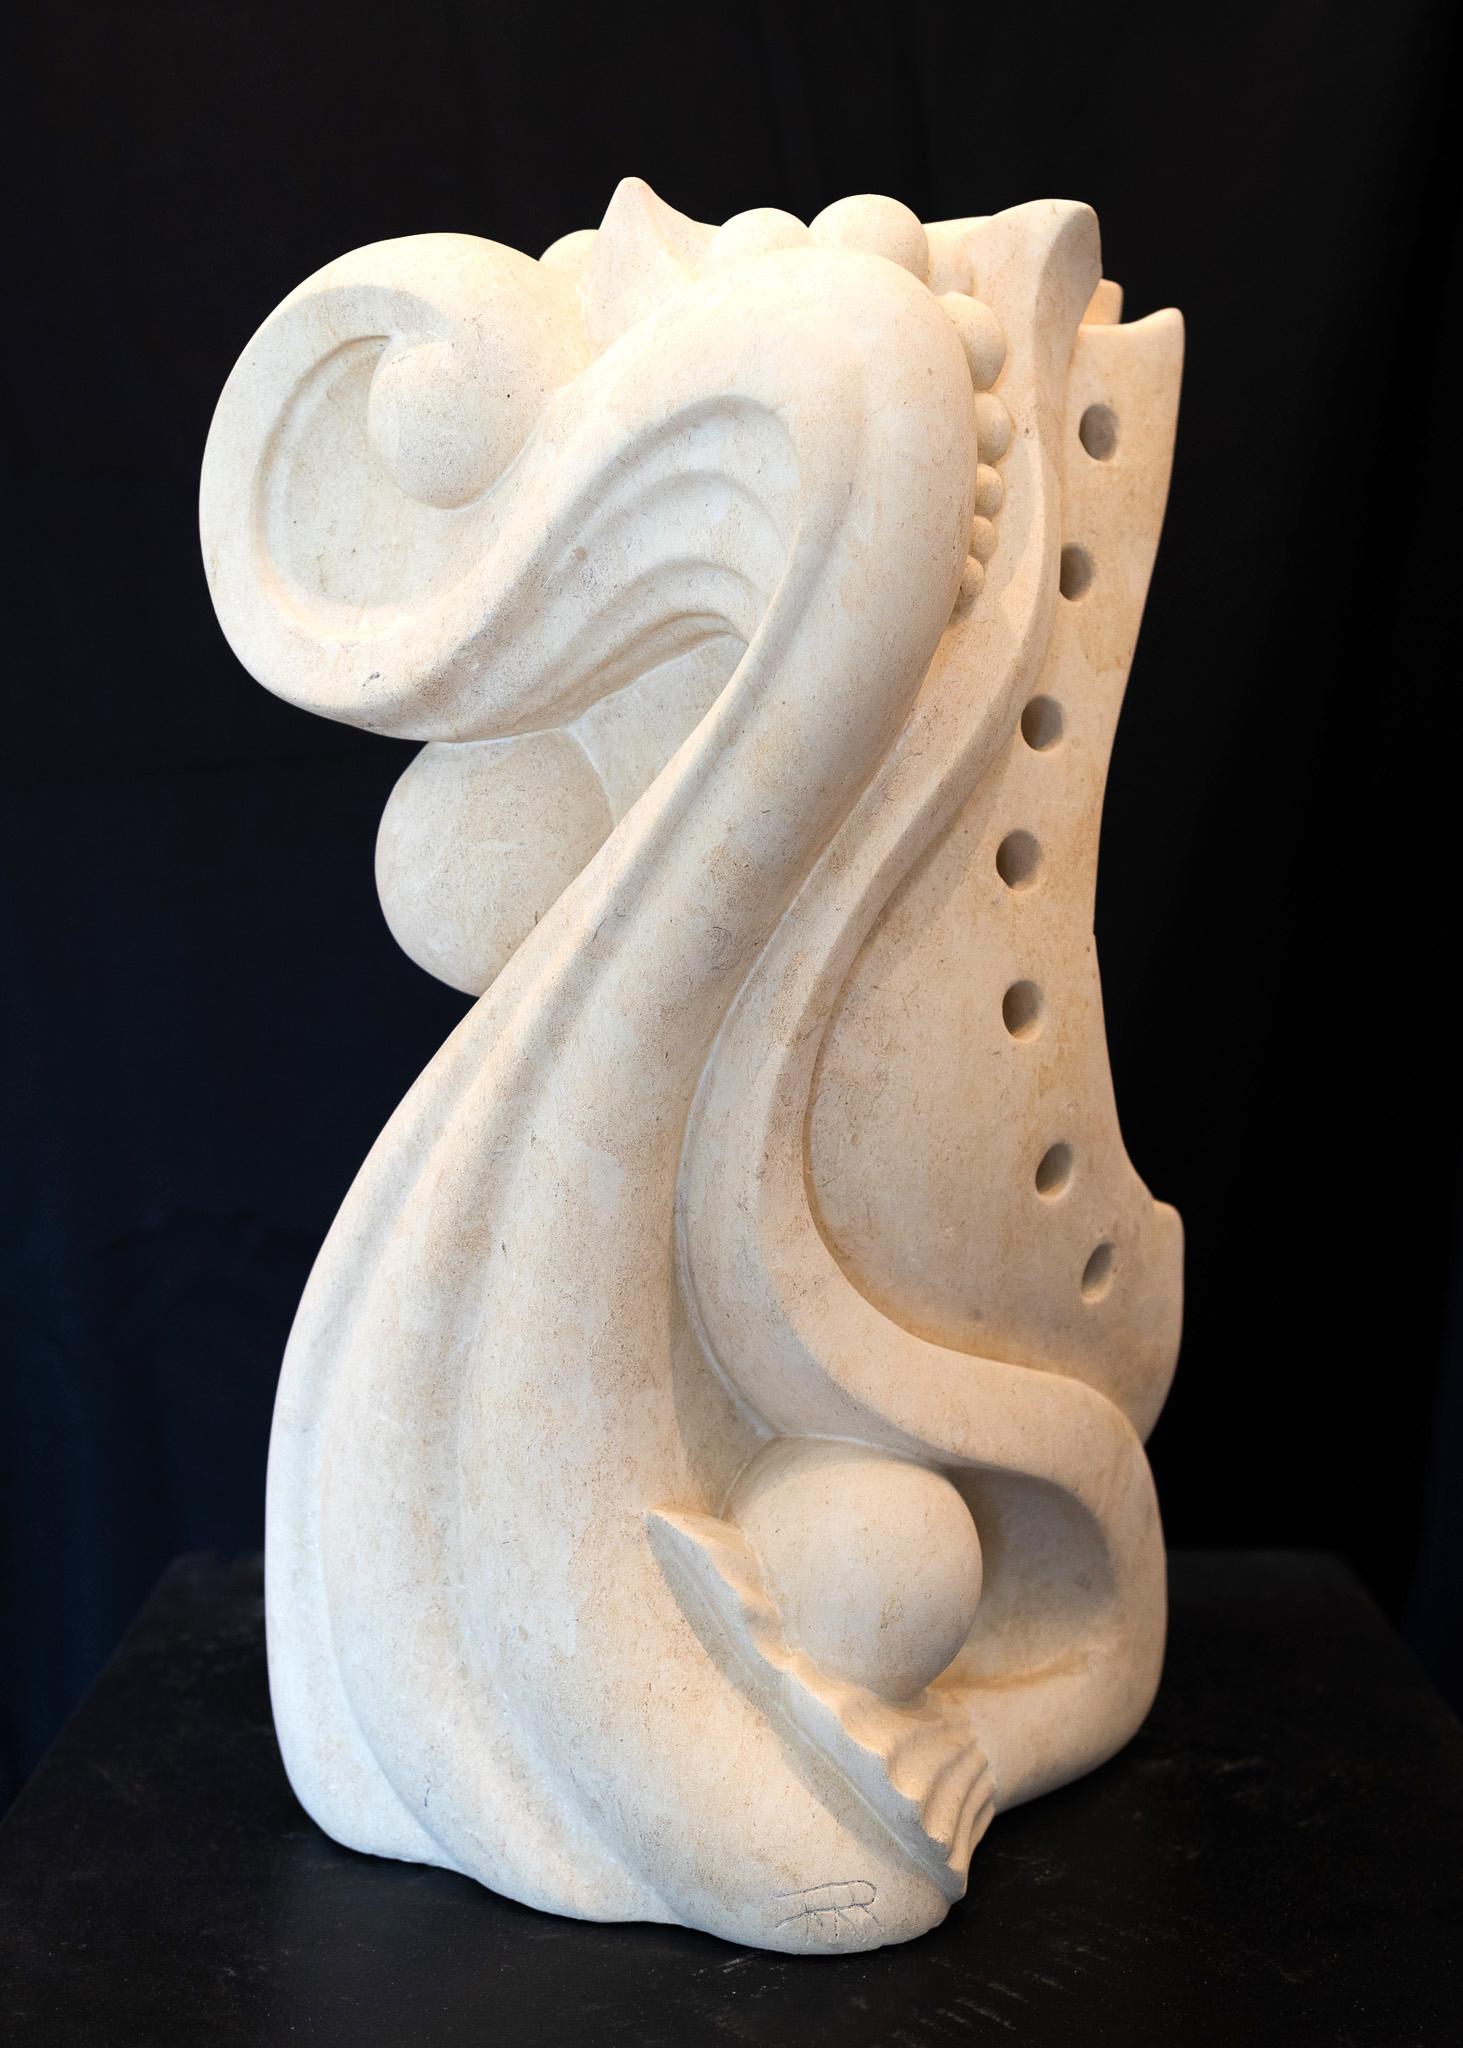 Bob Ragan Abstract Sculpture - "Seven Sisters" Fantastical Psychedelic Sculpture White Limestone Stone Carving